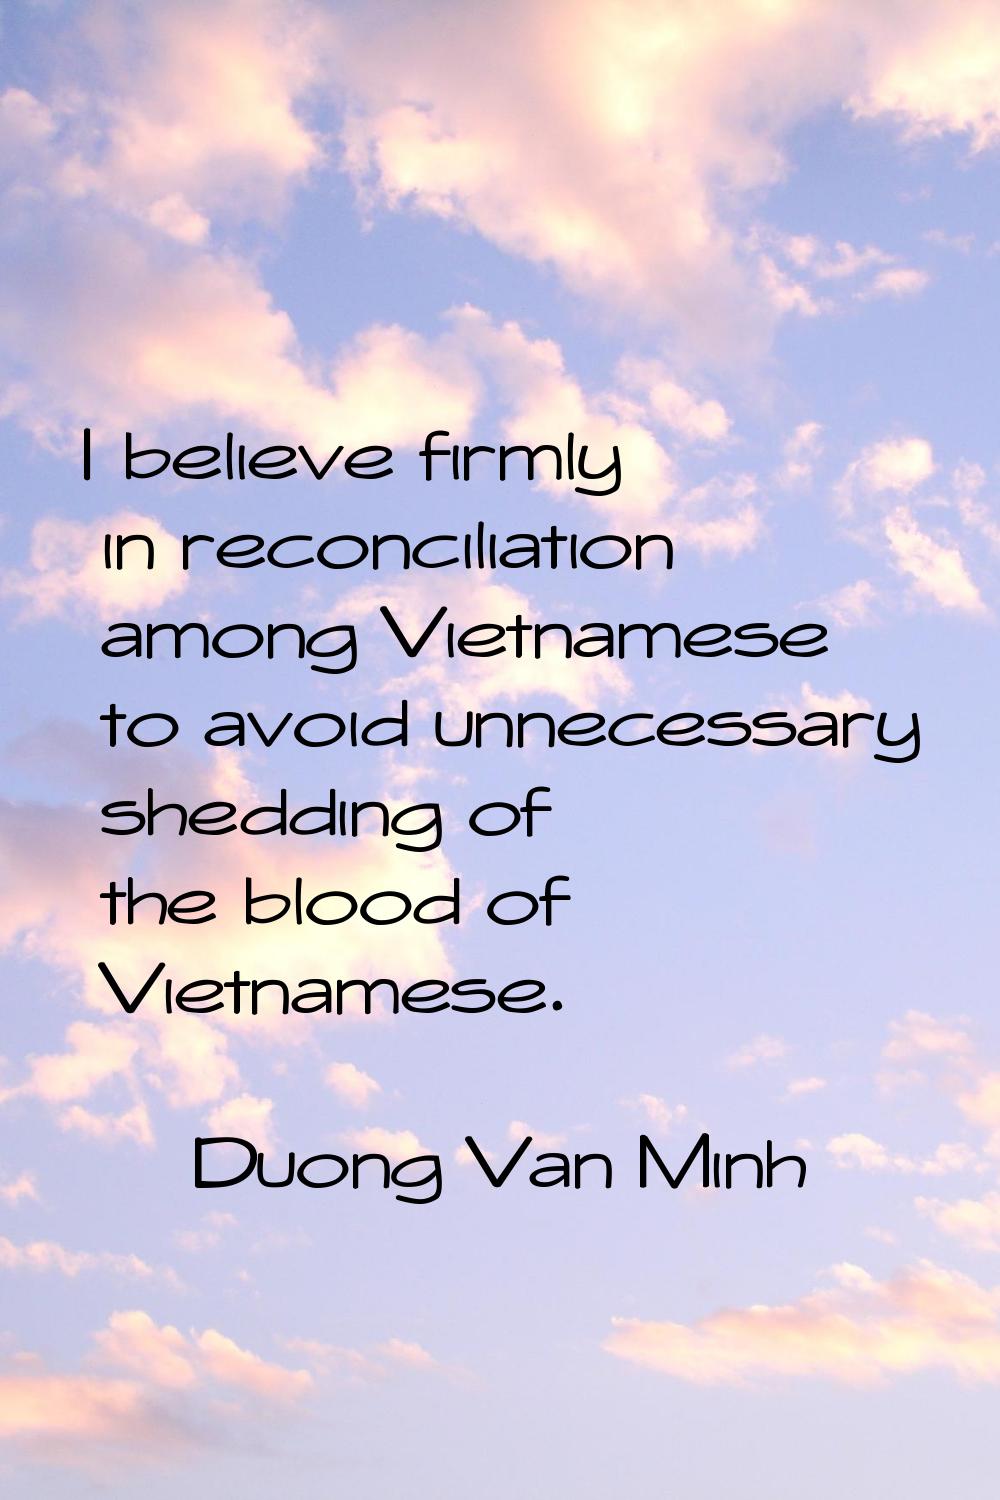 I believe firmly in reconciliation among Vietnamese to avoid unnecessary shedding of the blood of V